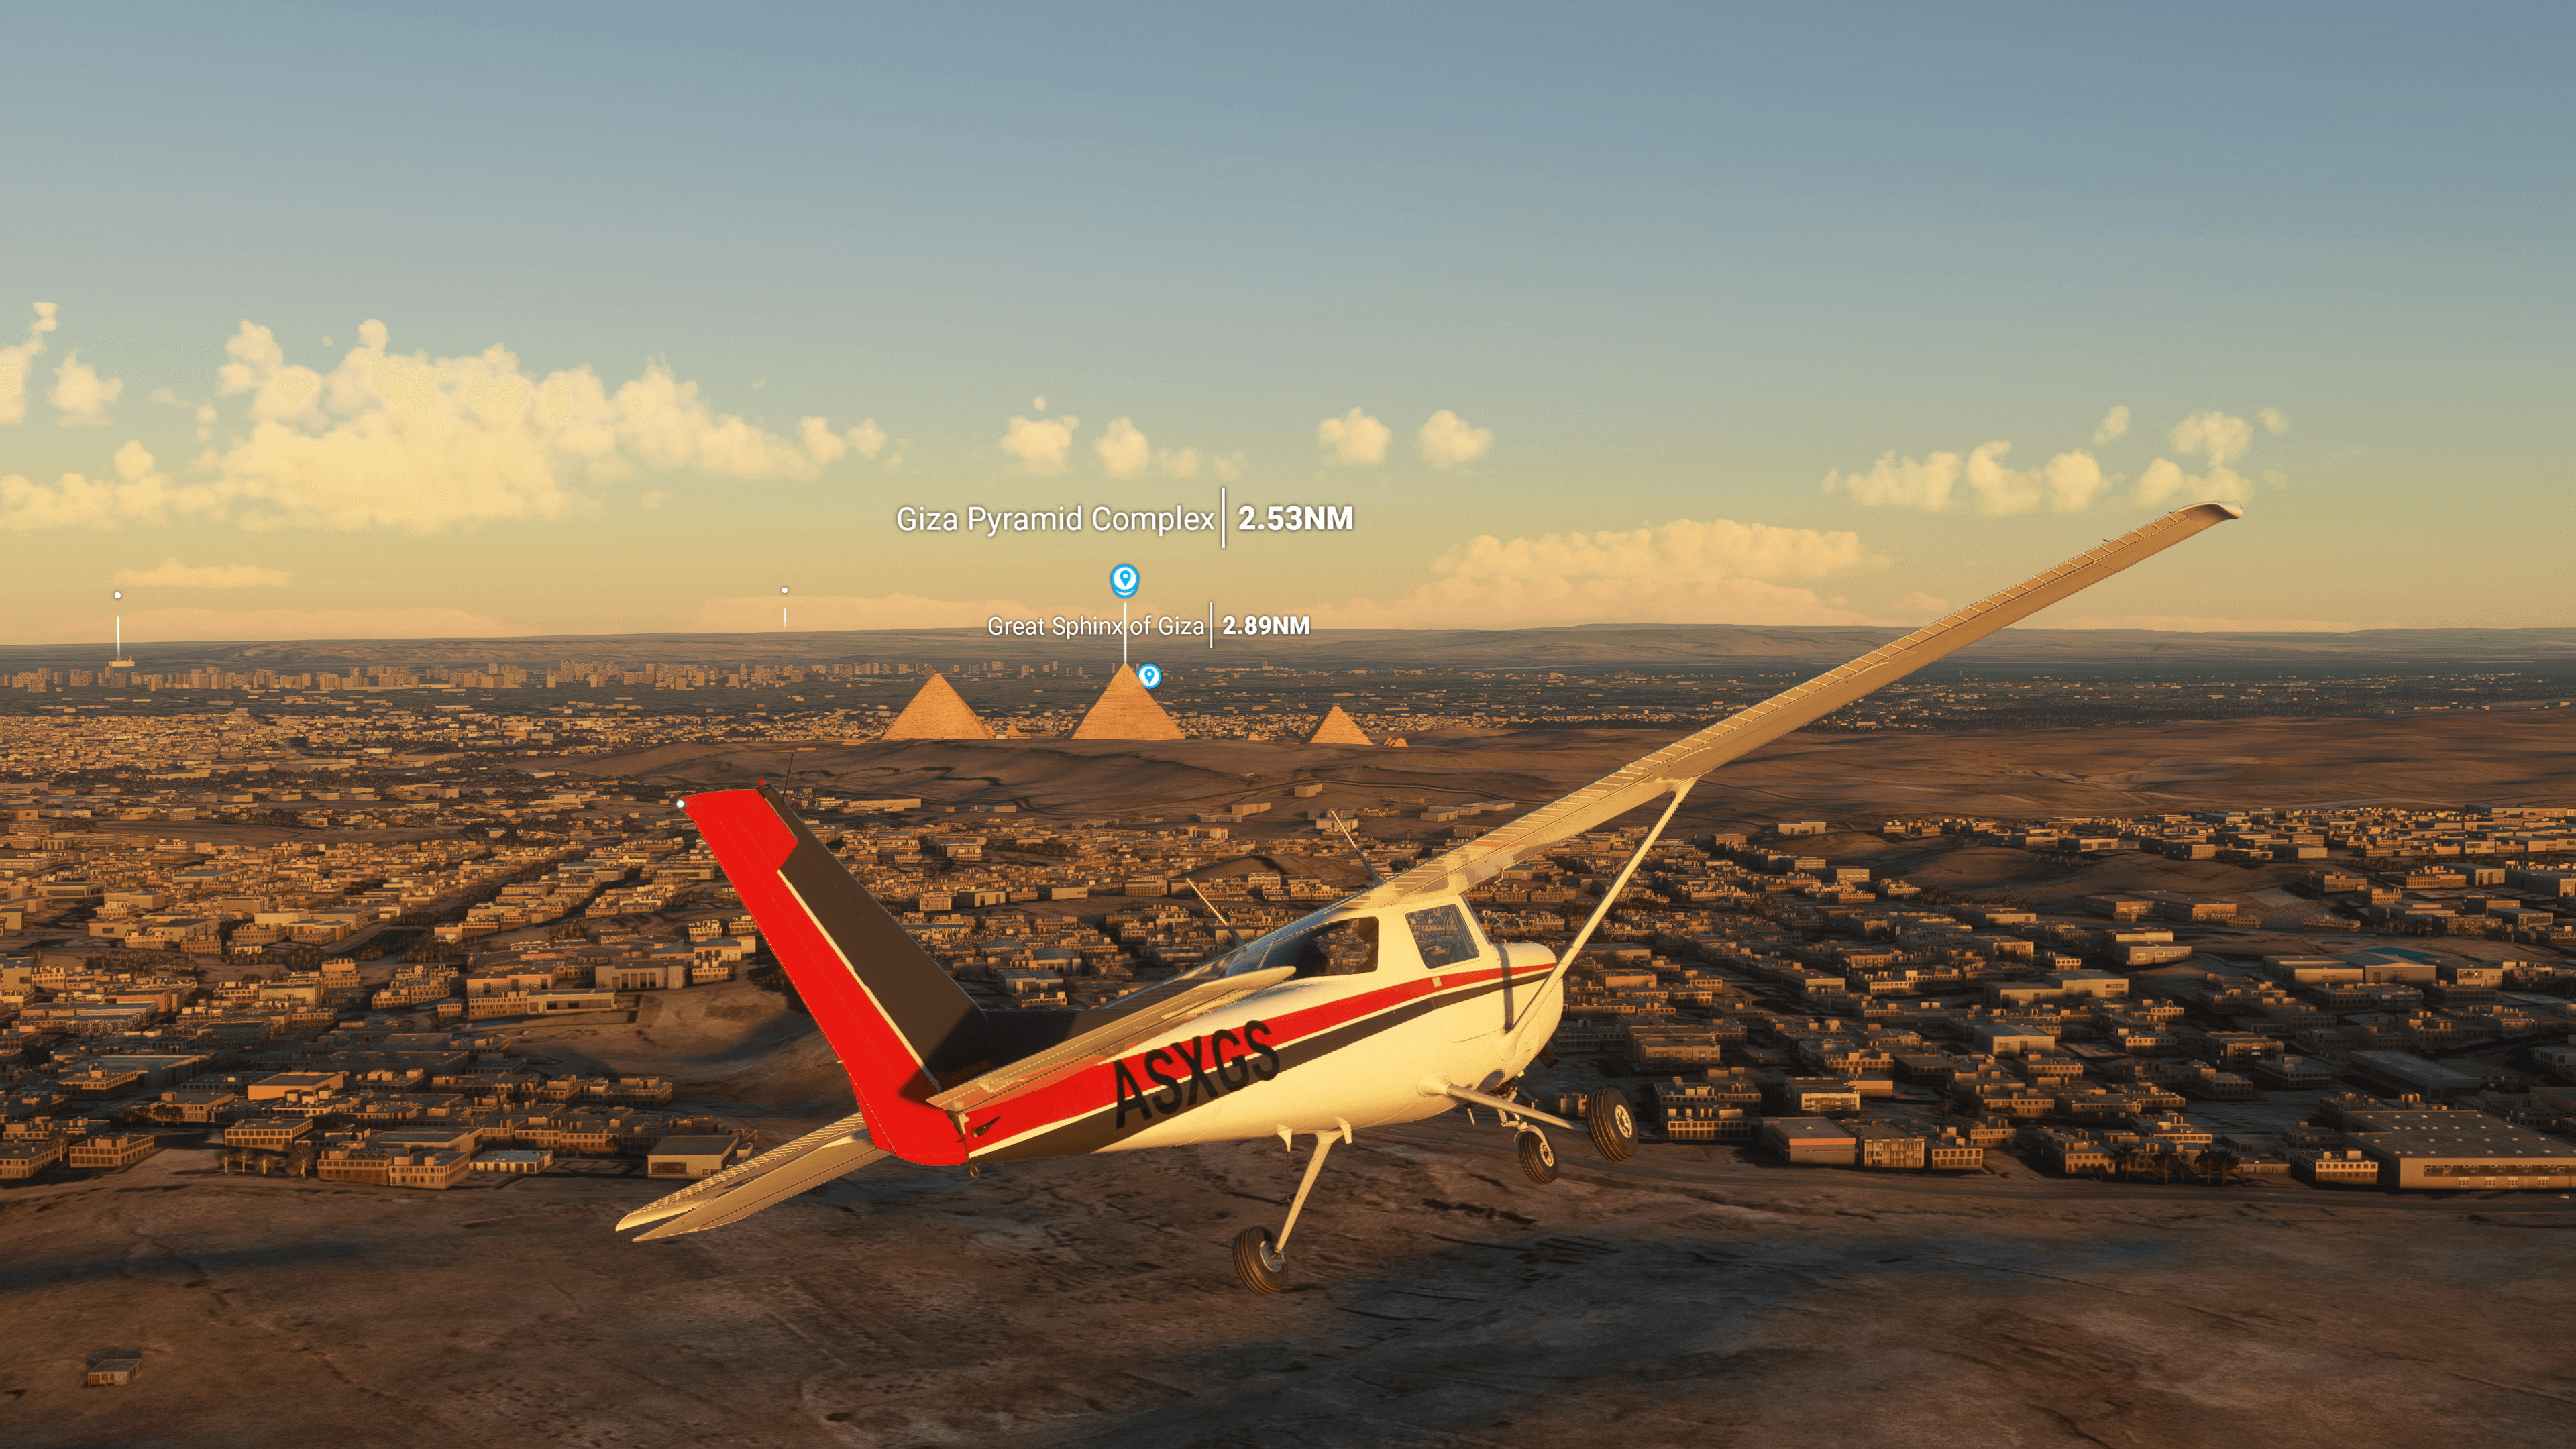 Microsoft Flight Simulator is landing on Xbox Series X / S consoles on July  27th - The Verge